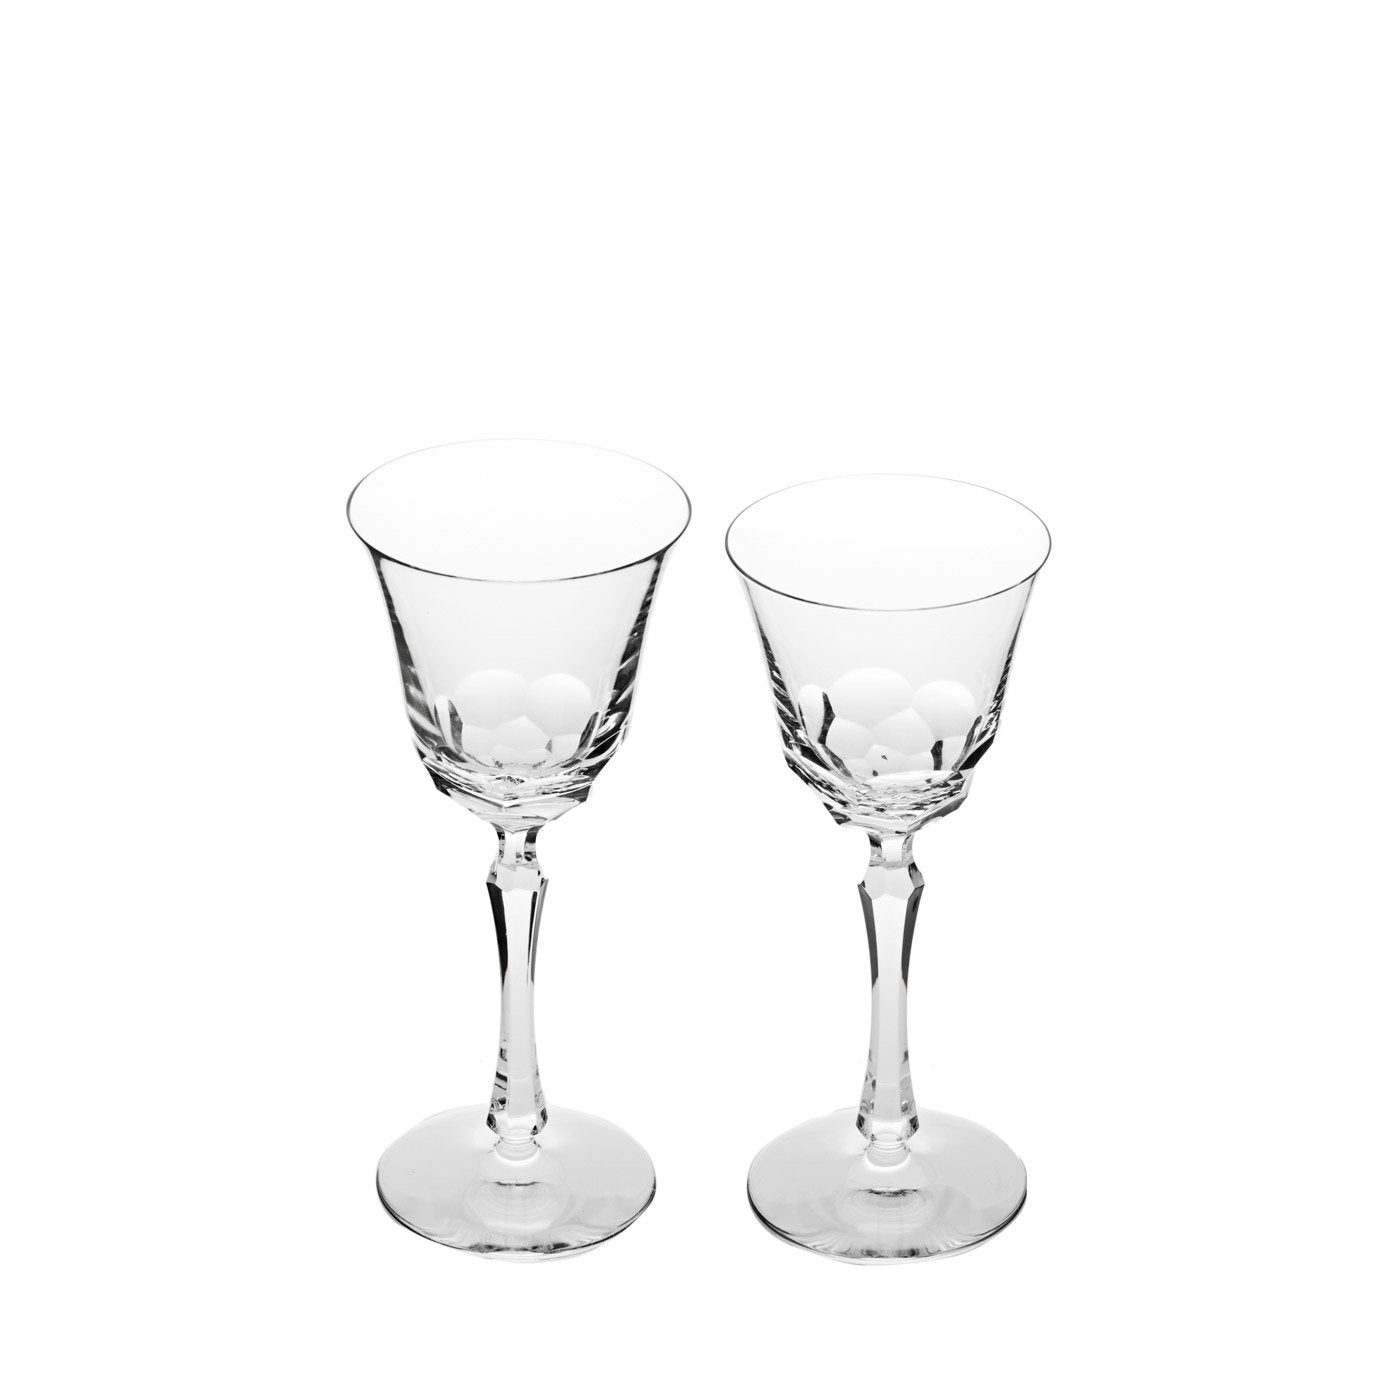 Set of 6 Narciso Crystal Water Glasses - Alternative view 2